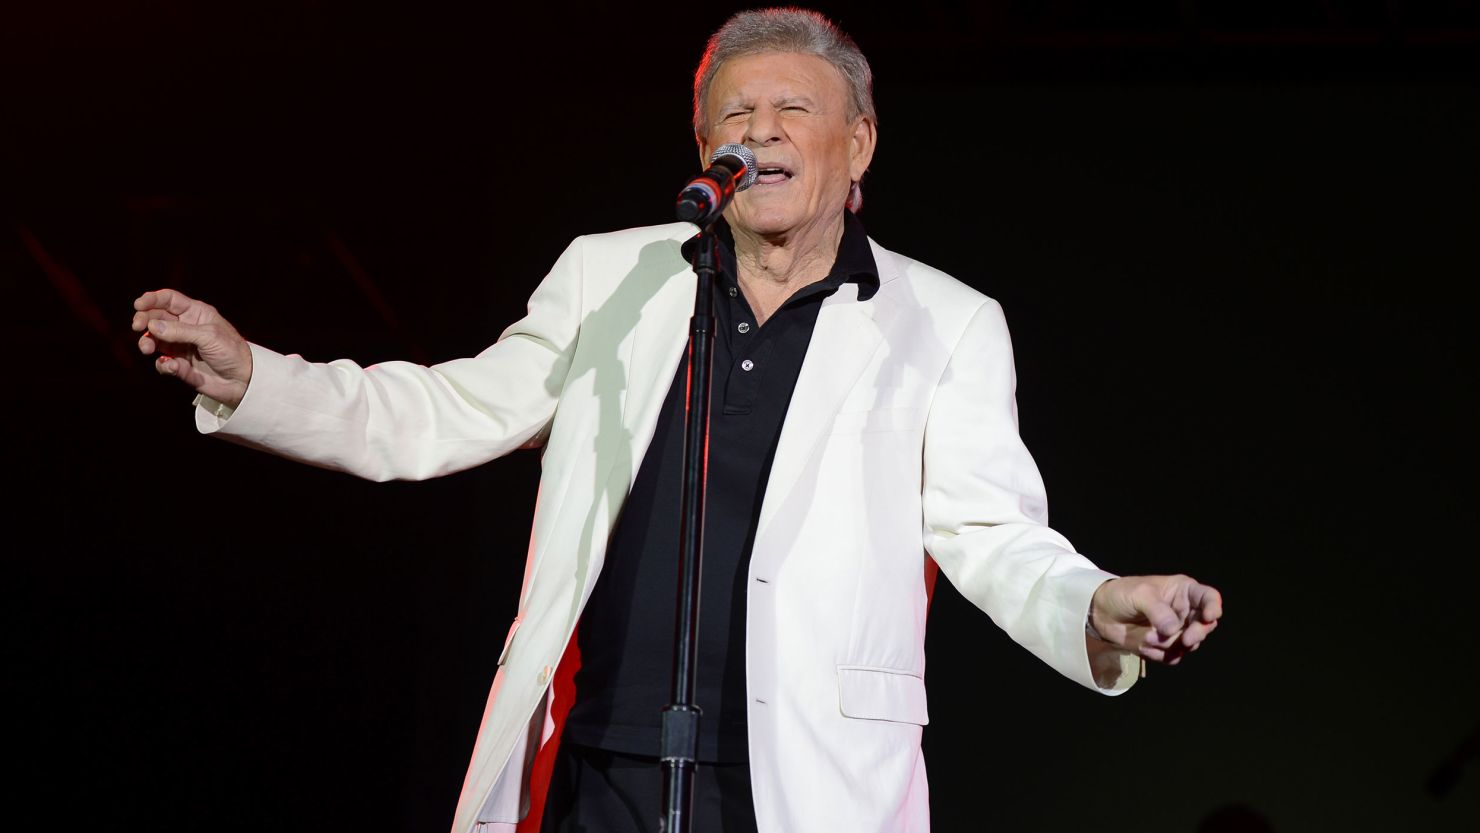 Bobby Rydell, seen here performing in 2013, died on April 5 at age 79, according to his representatives.